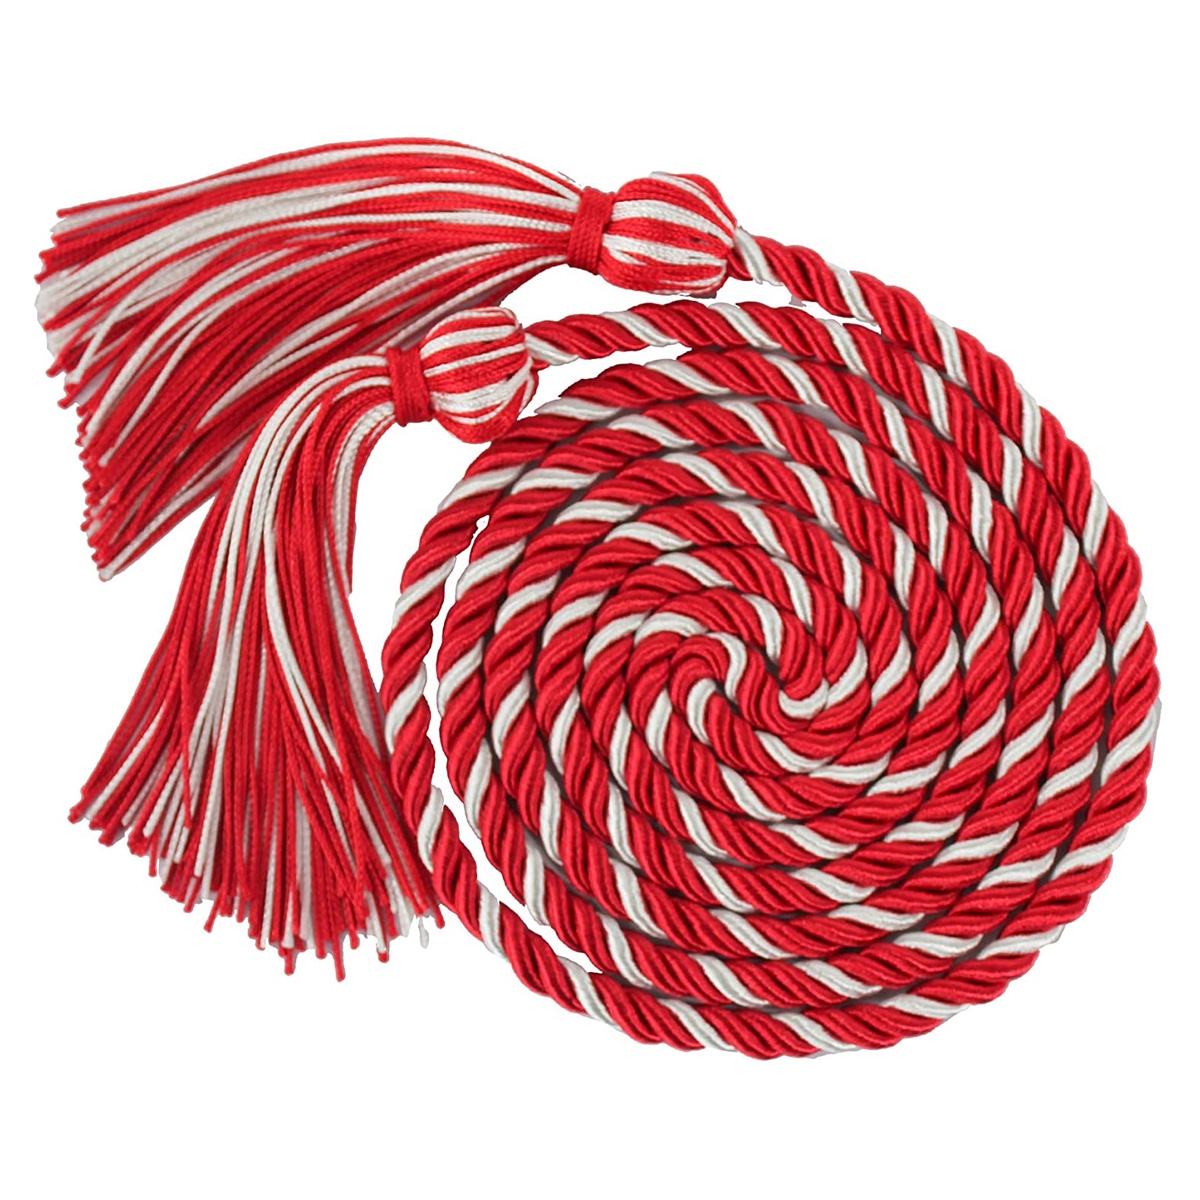 Graduation Mall Graduation Honor Cords 68  red and white color nice tassel